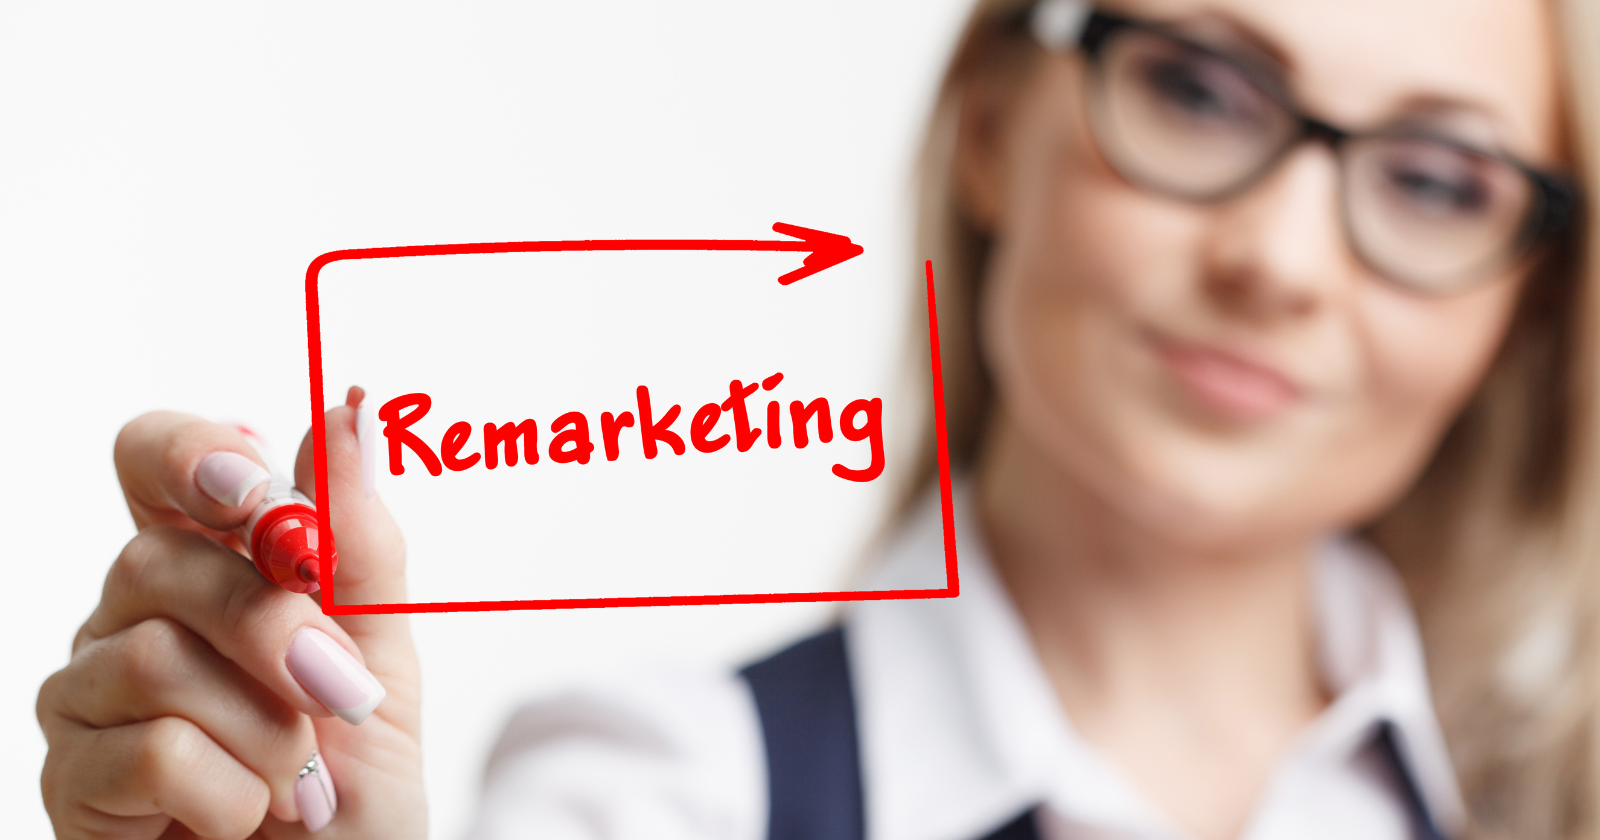 What Is Remarketing: How Does It Work?